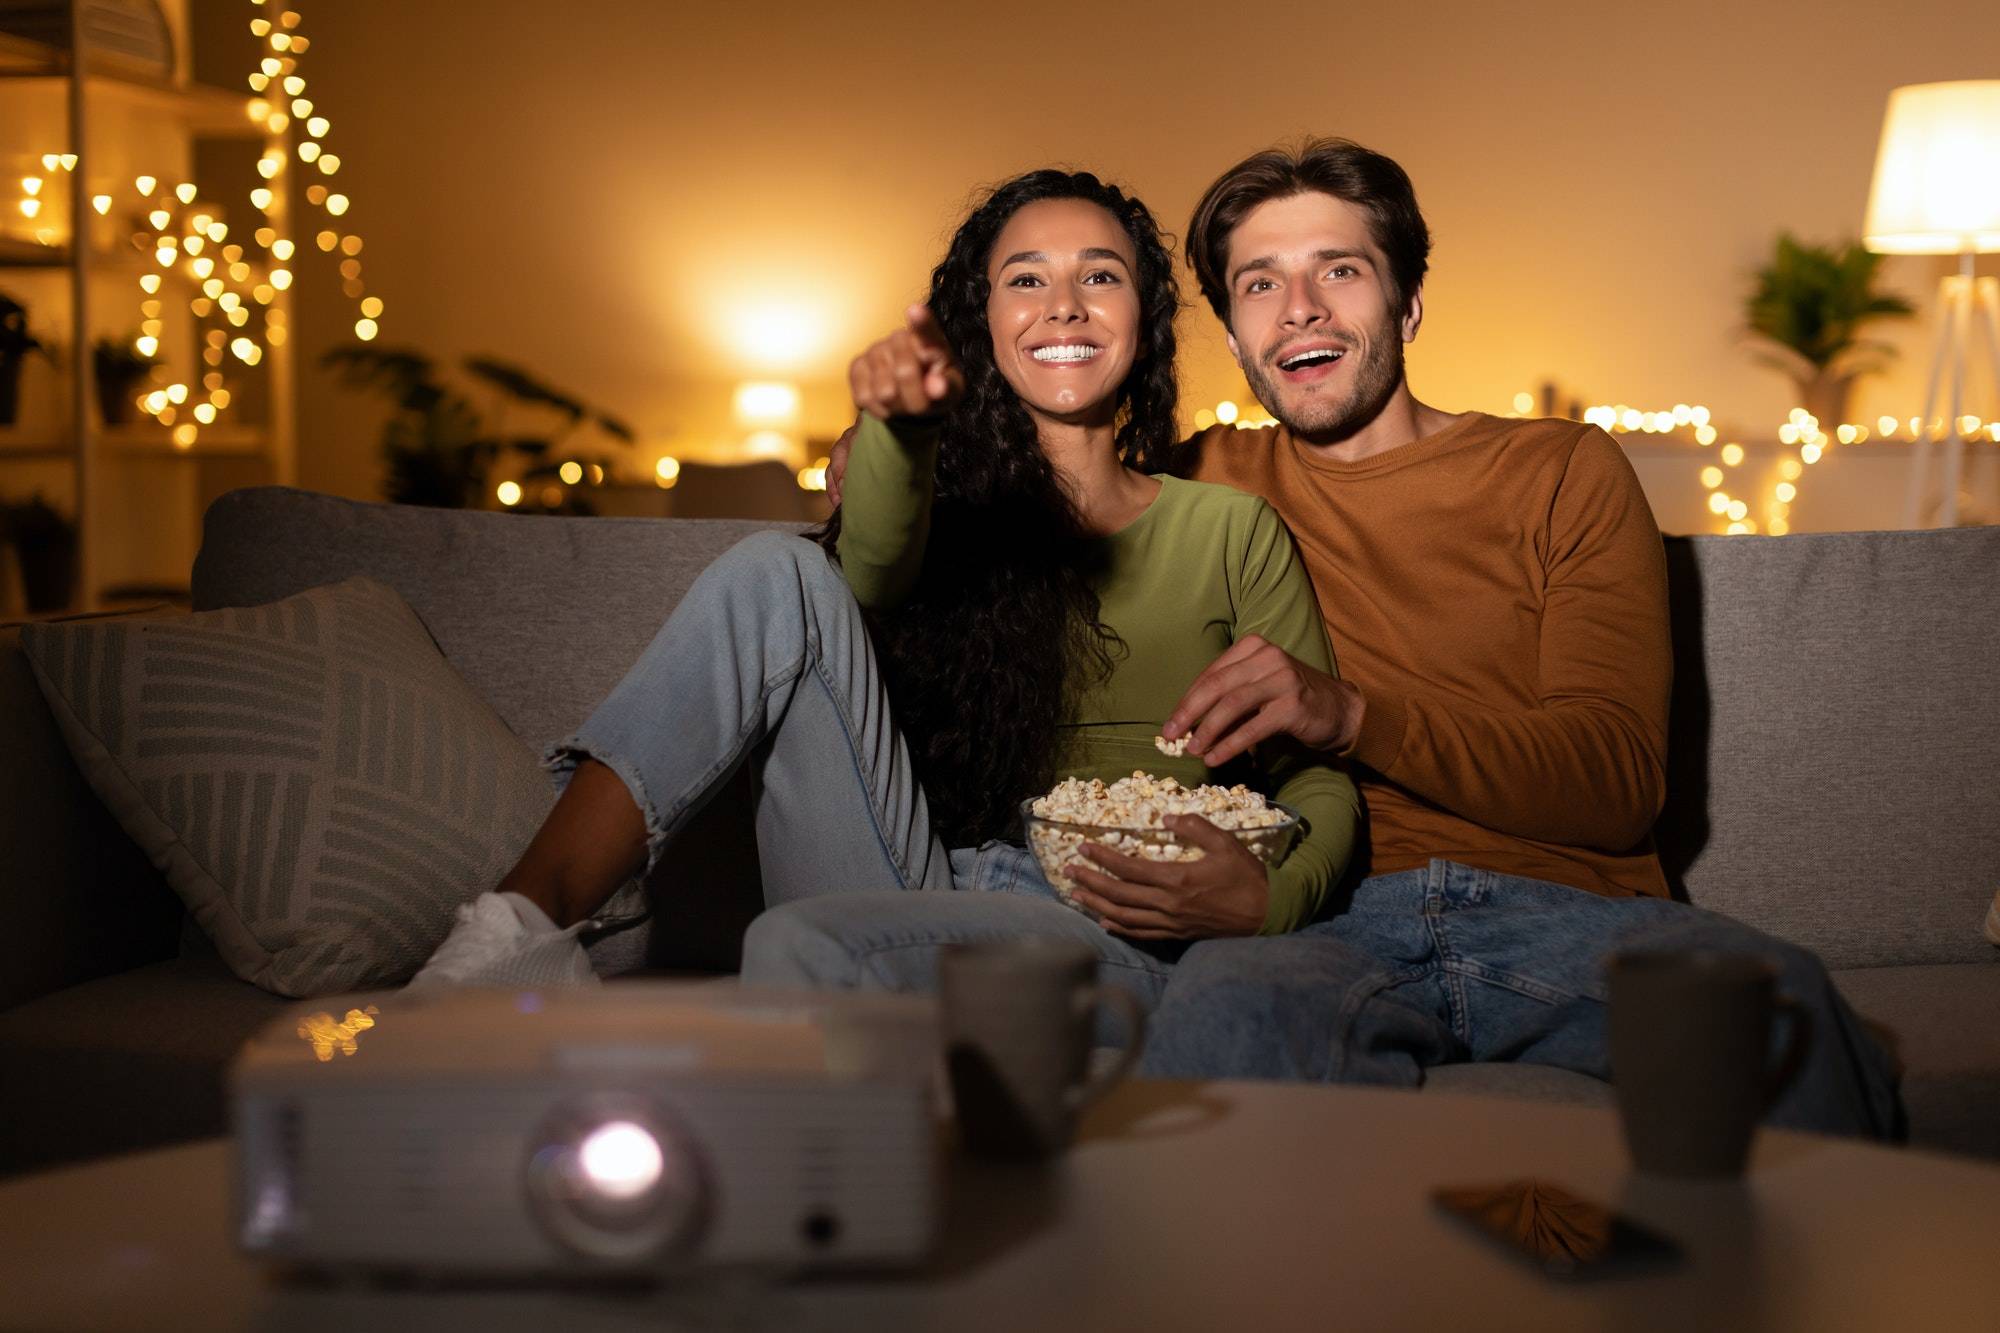 Boyfriend And Girlfriend Watching Movie Via Projector At Home